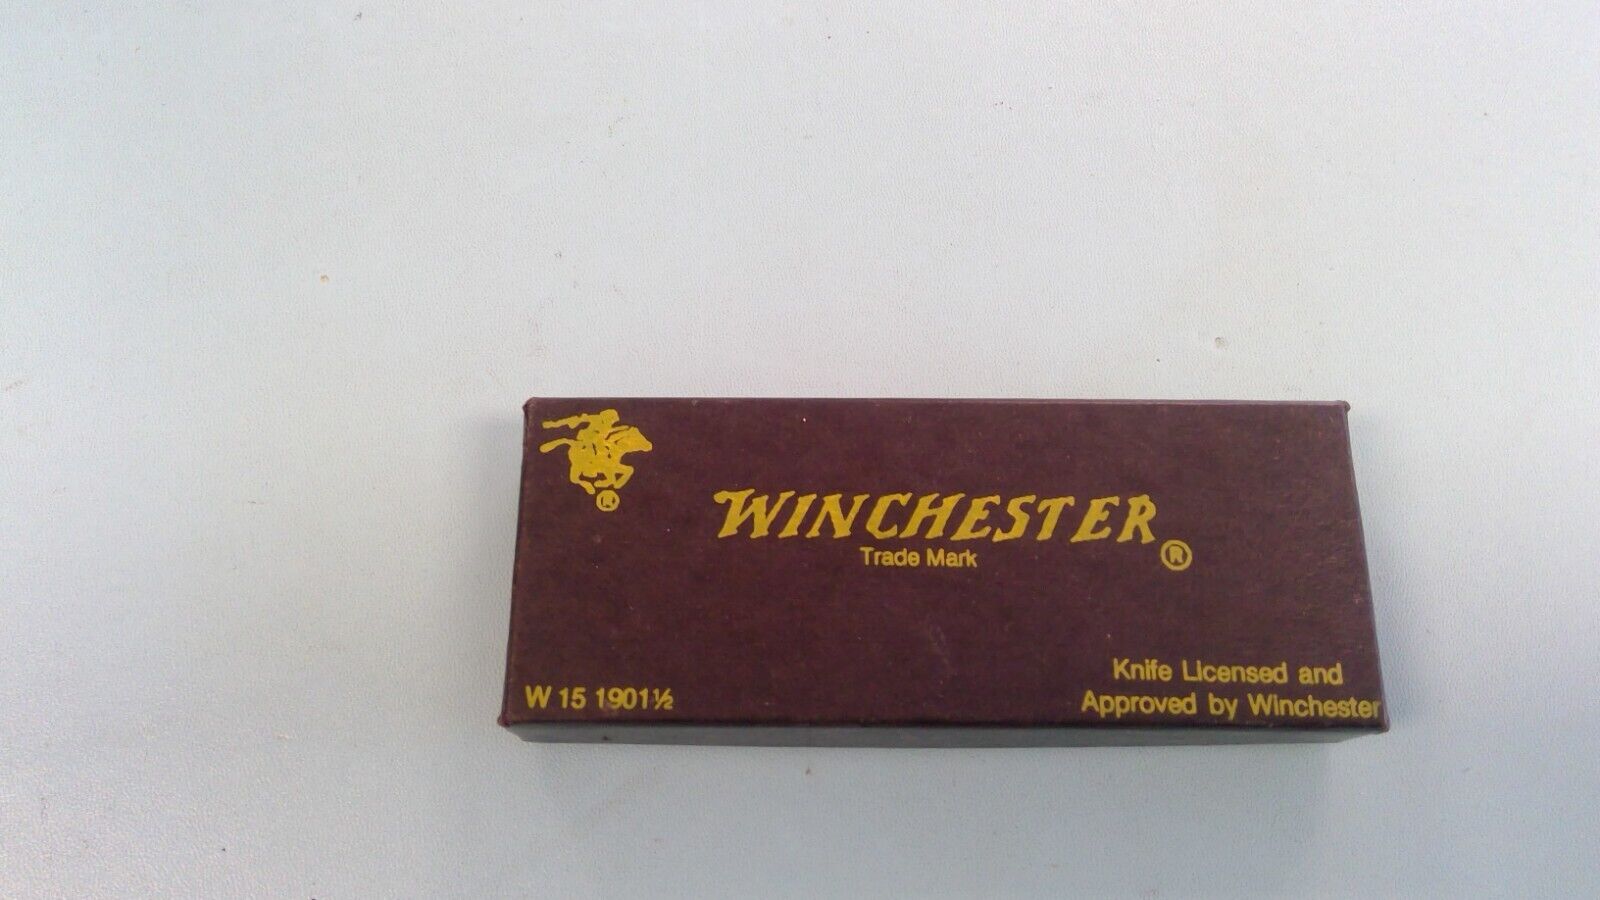 Winchester W15 1901 1/2 Knife